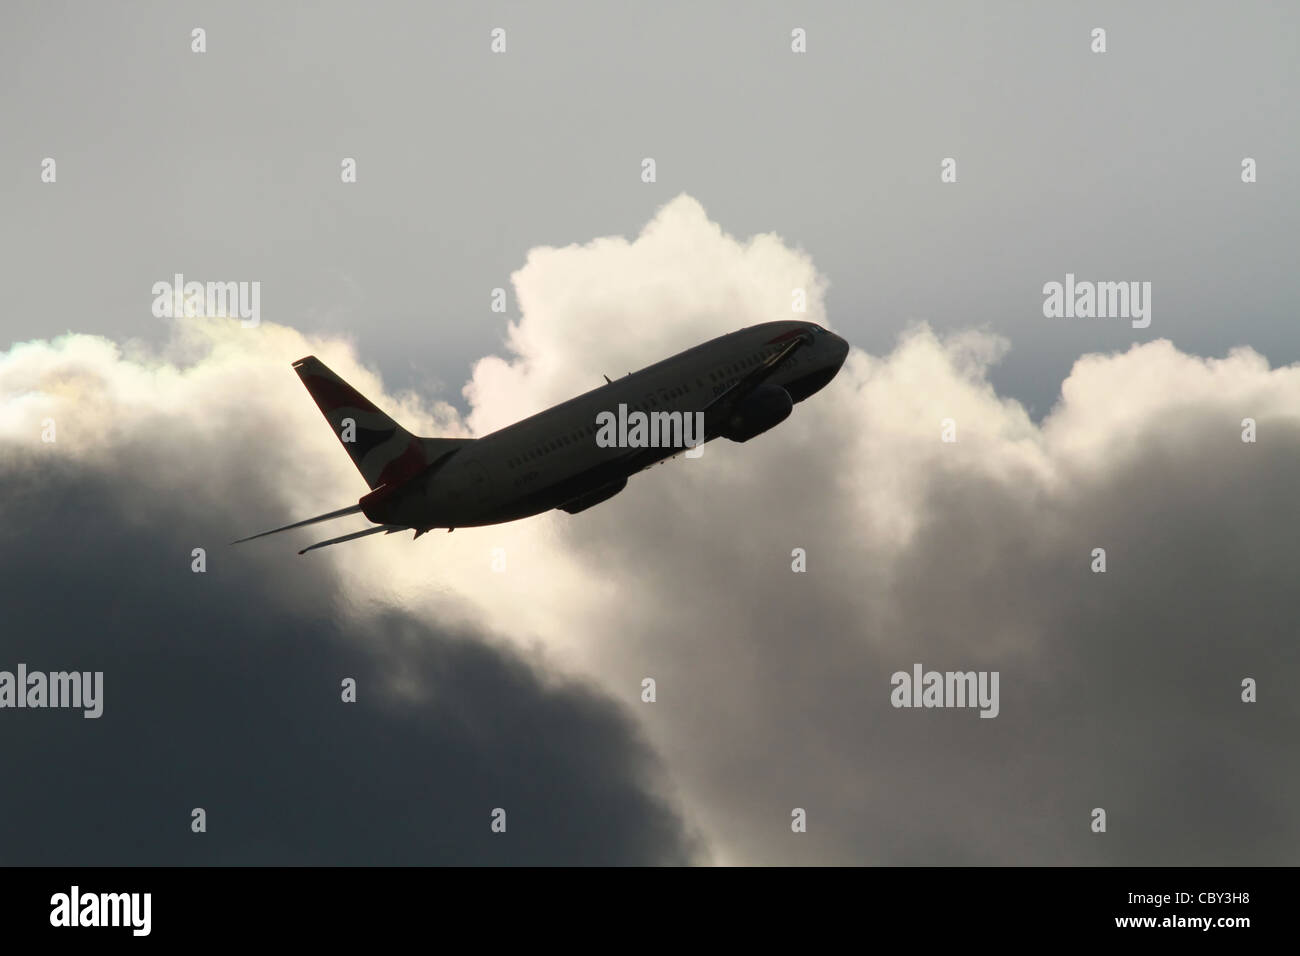 Jet airliner taking off into stormy sky Stock Photo